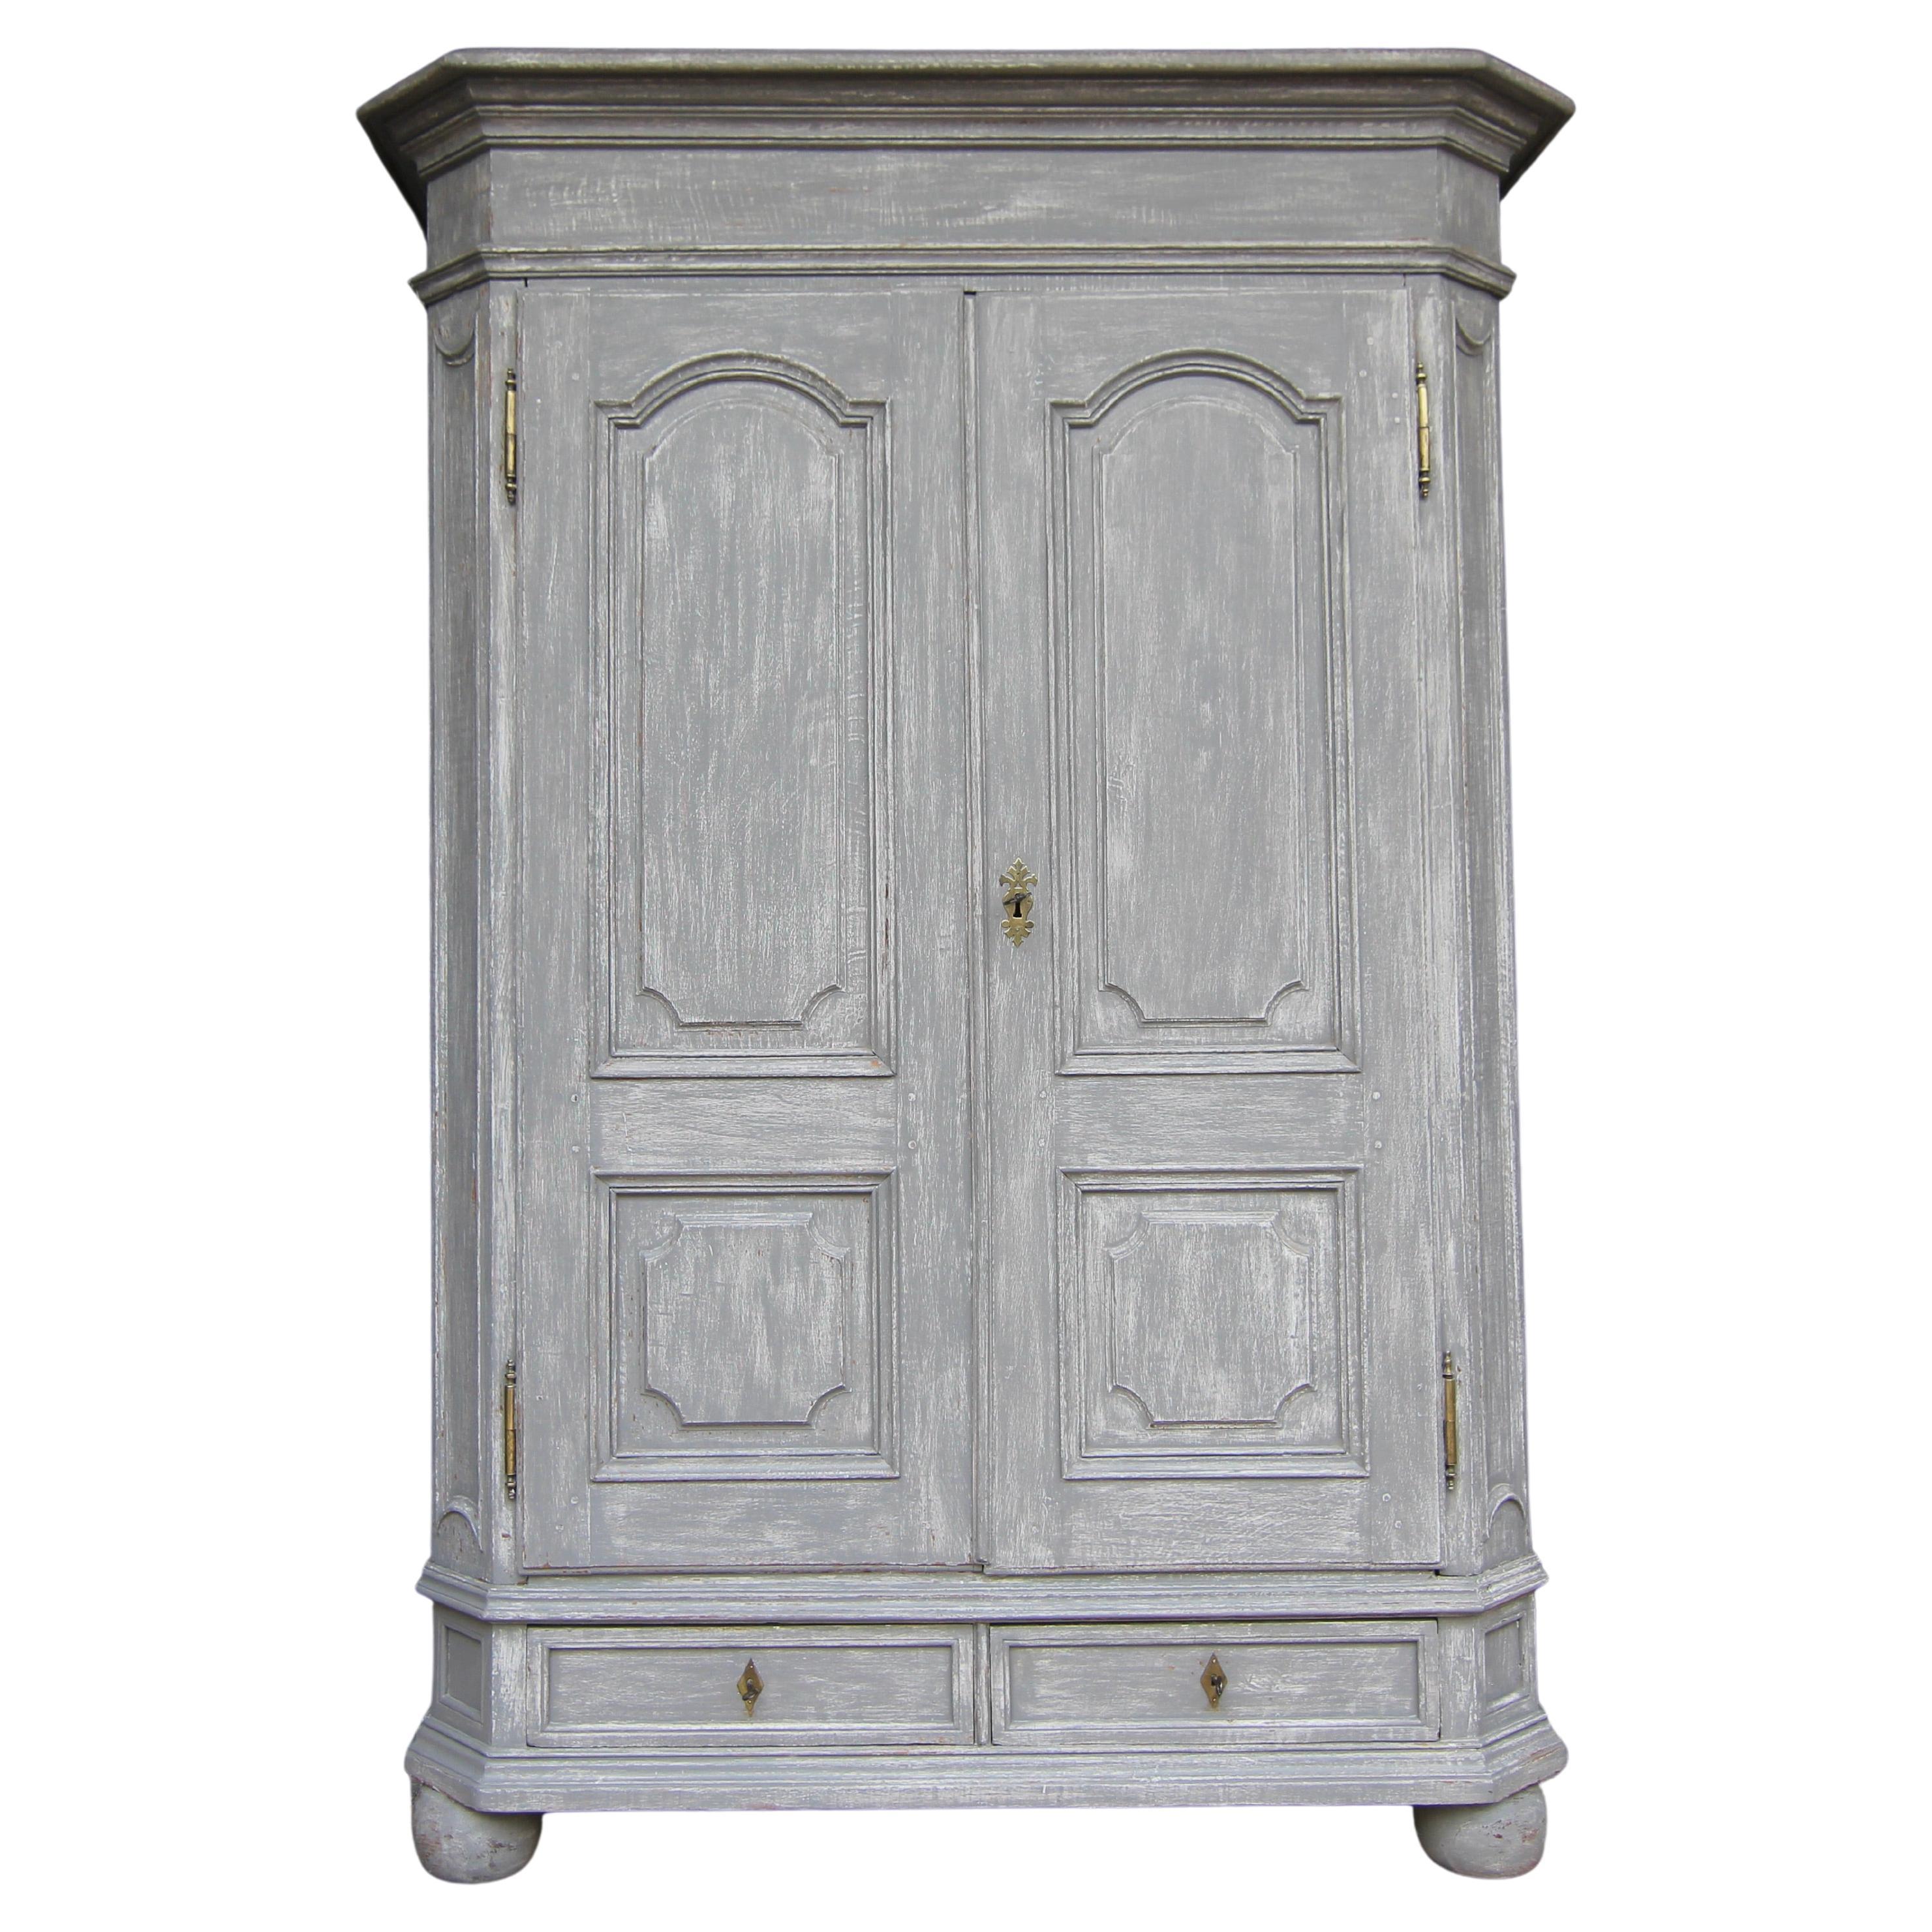 Early 19th Century German Provincial Painted Cabinet